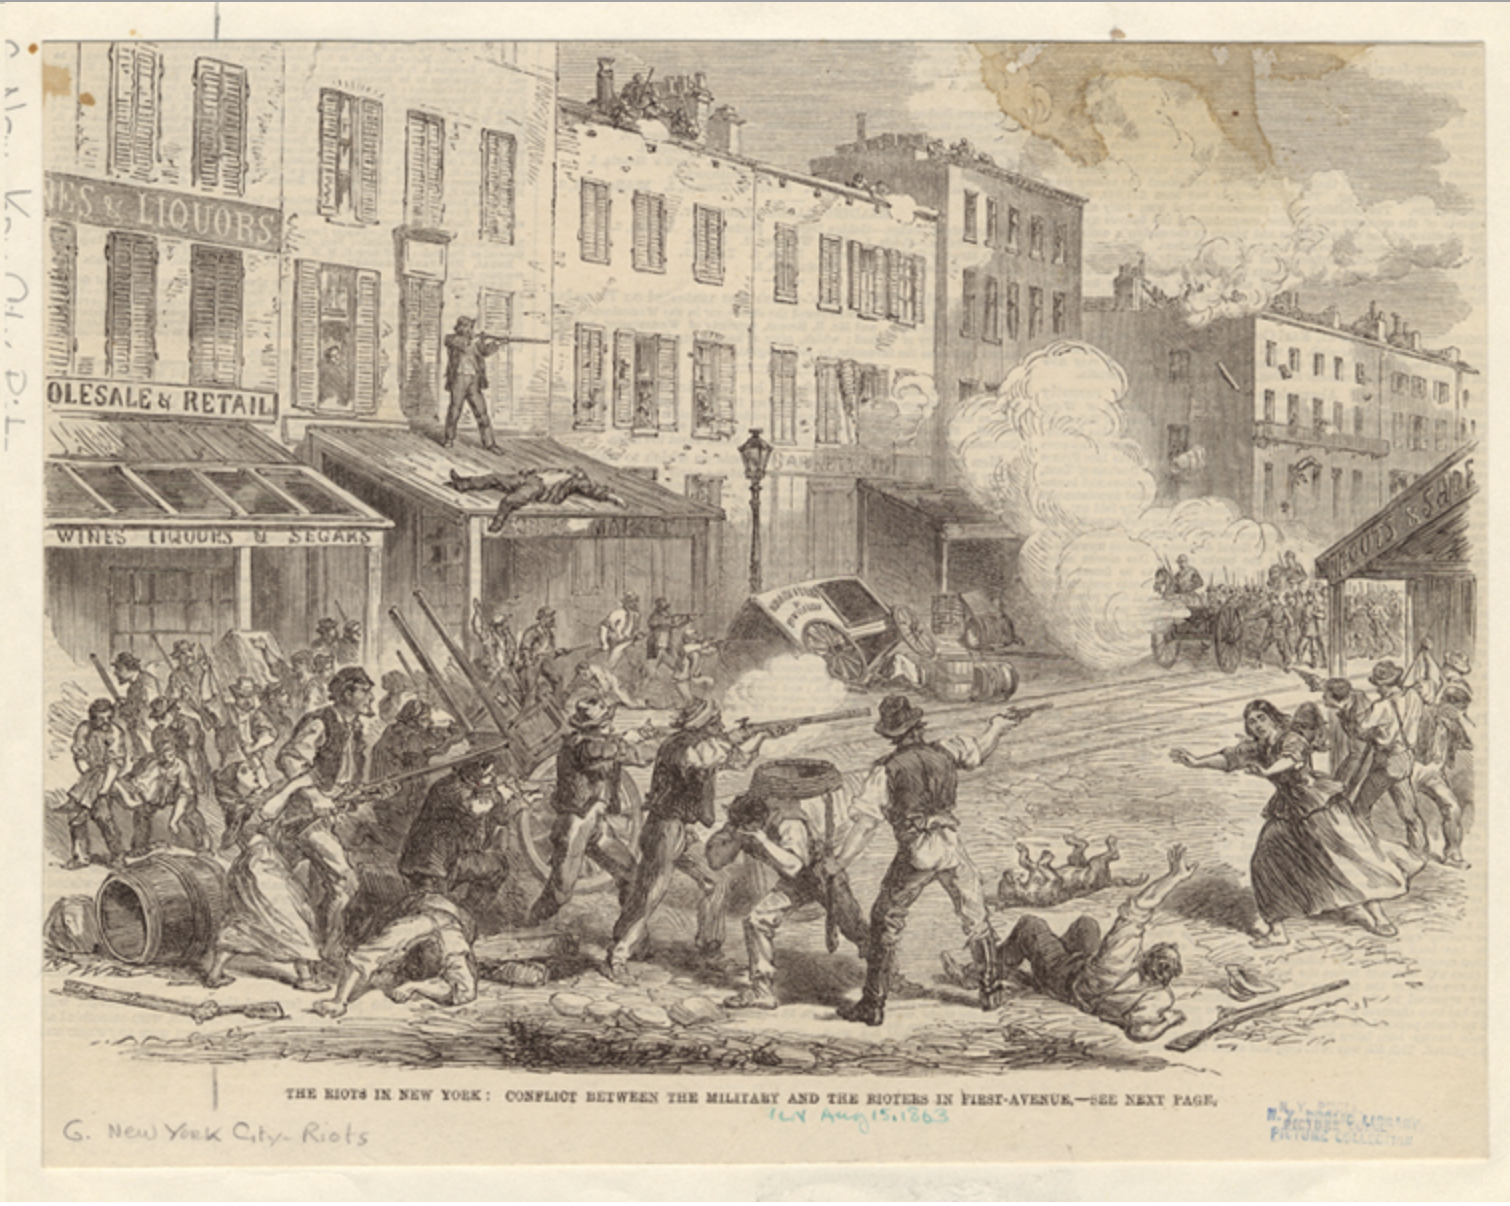 : New York City during the Draft Riots of 1863. Credit: Greenwich Village Society of Historical Preservation.